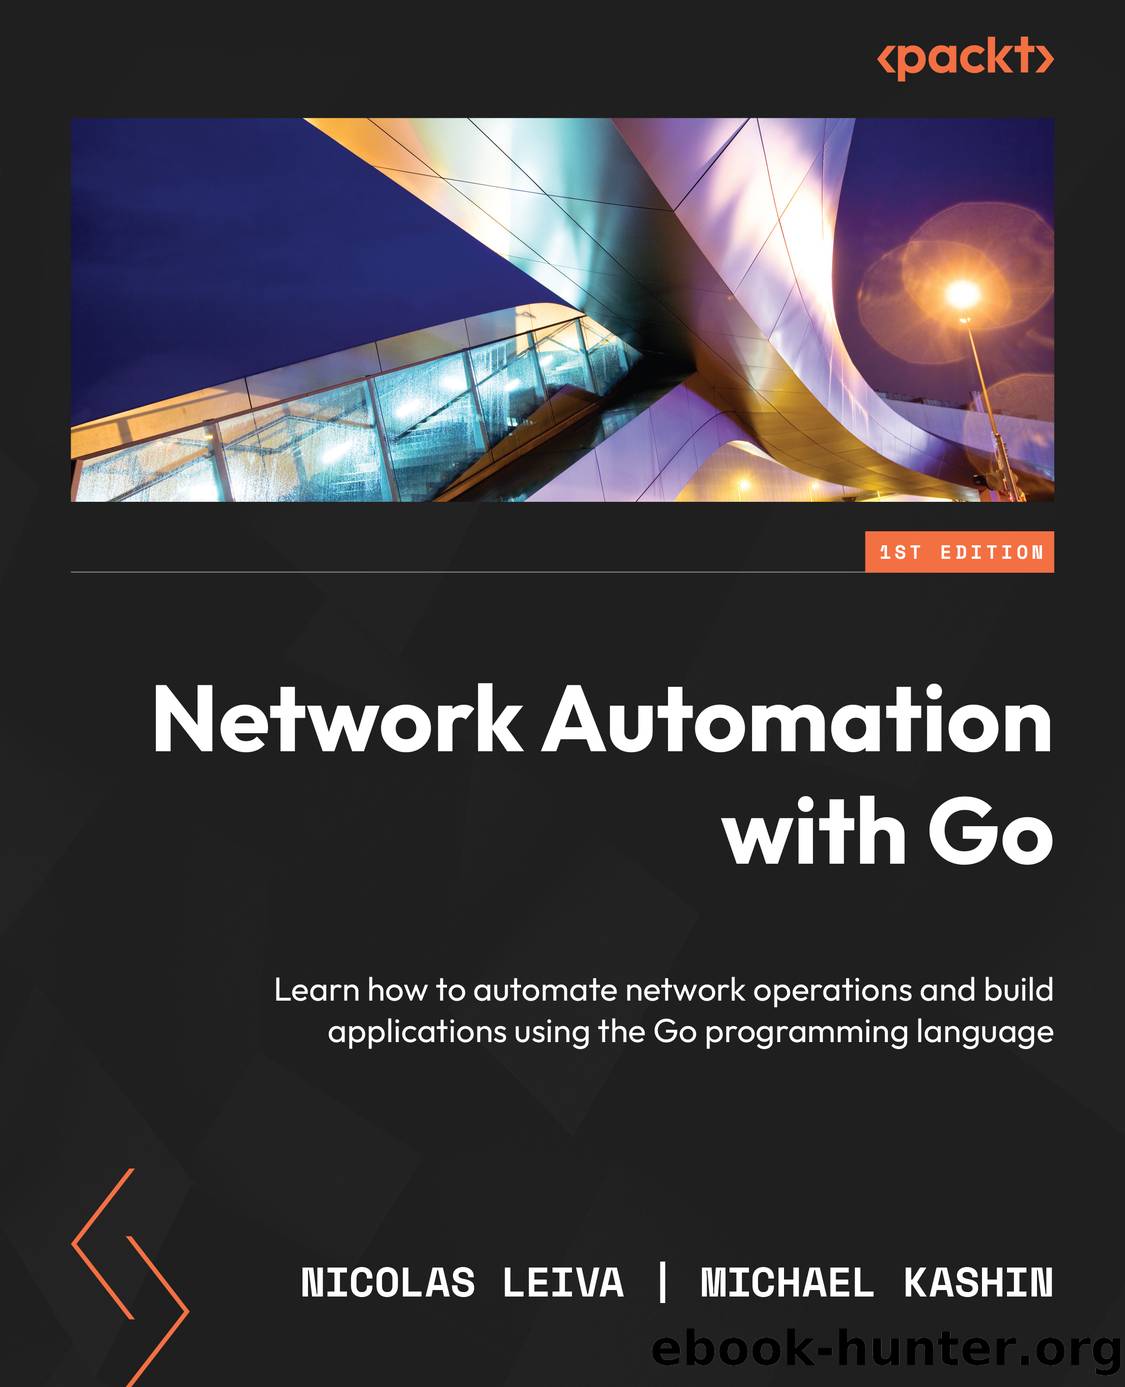 Network Automation with Go by Nicolas Leiva & Michael Kashin